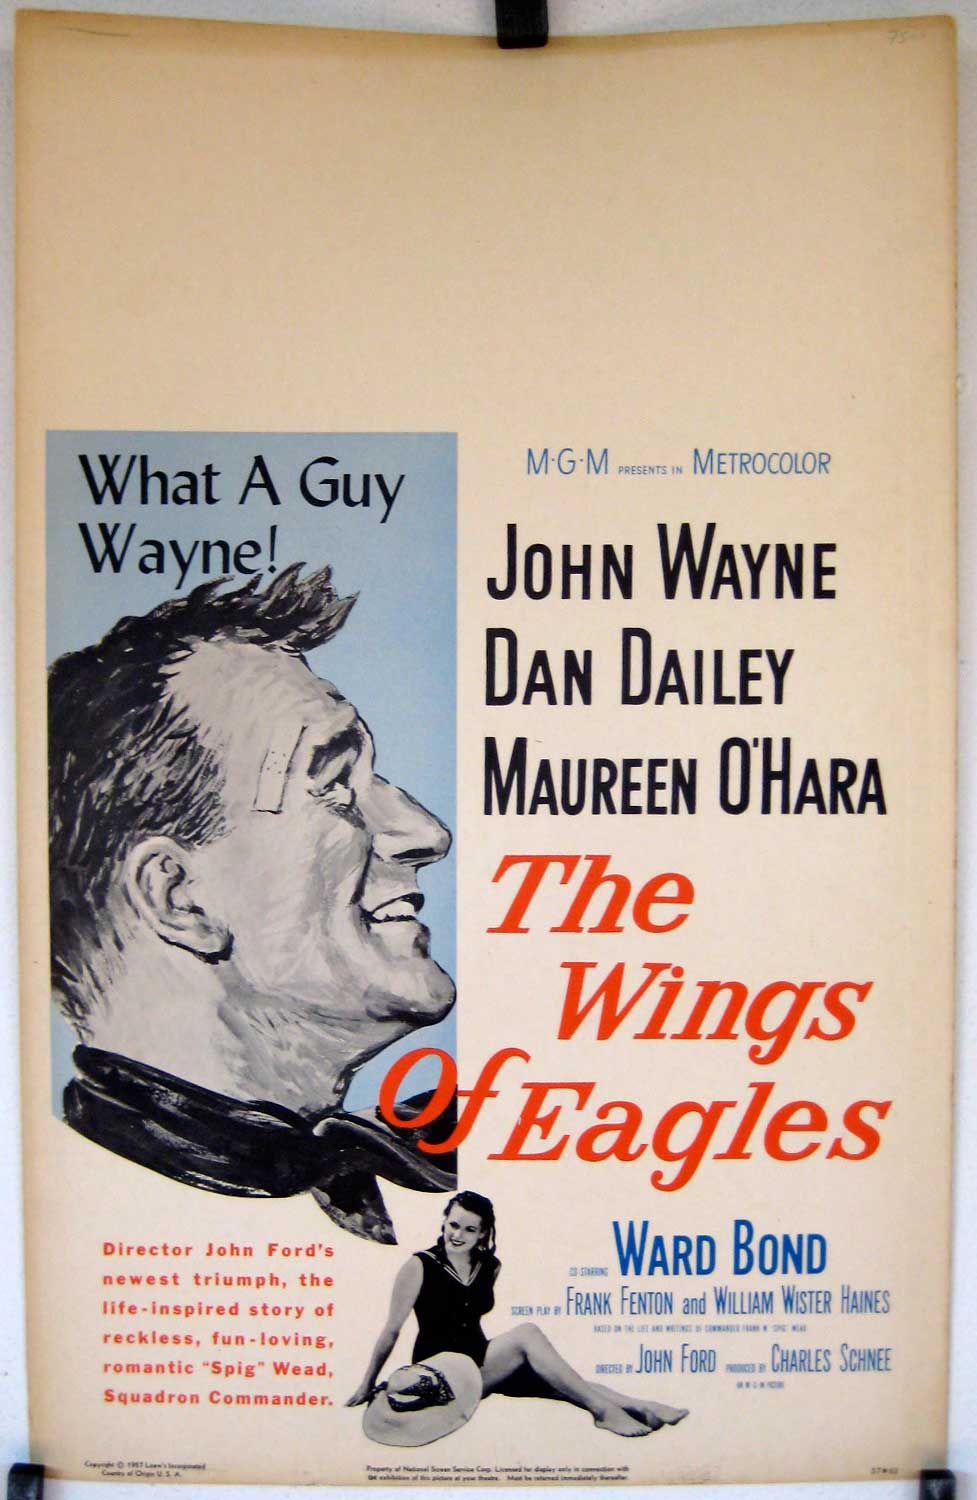 WINGS OF EAGLES, THE